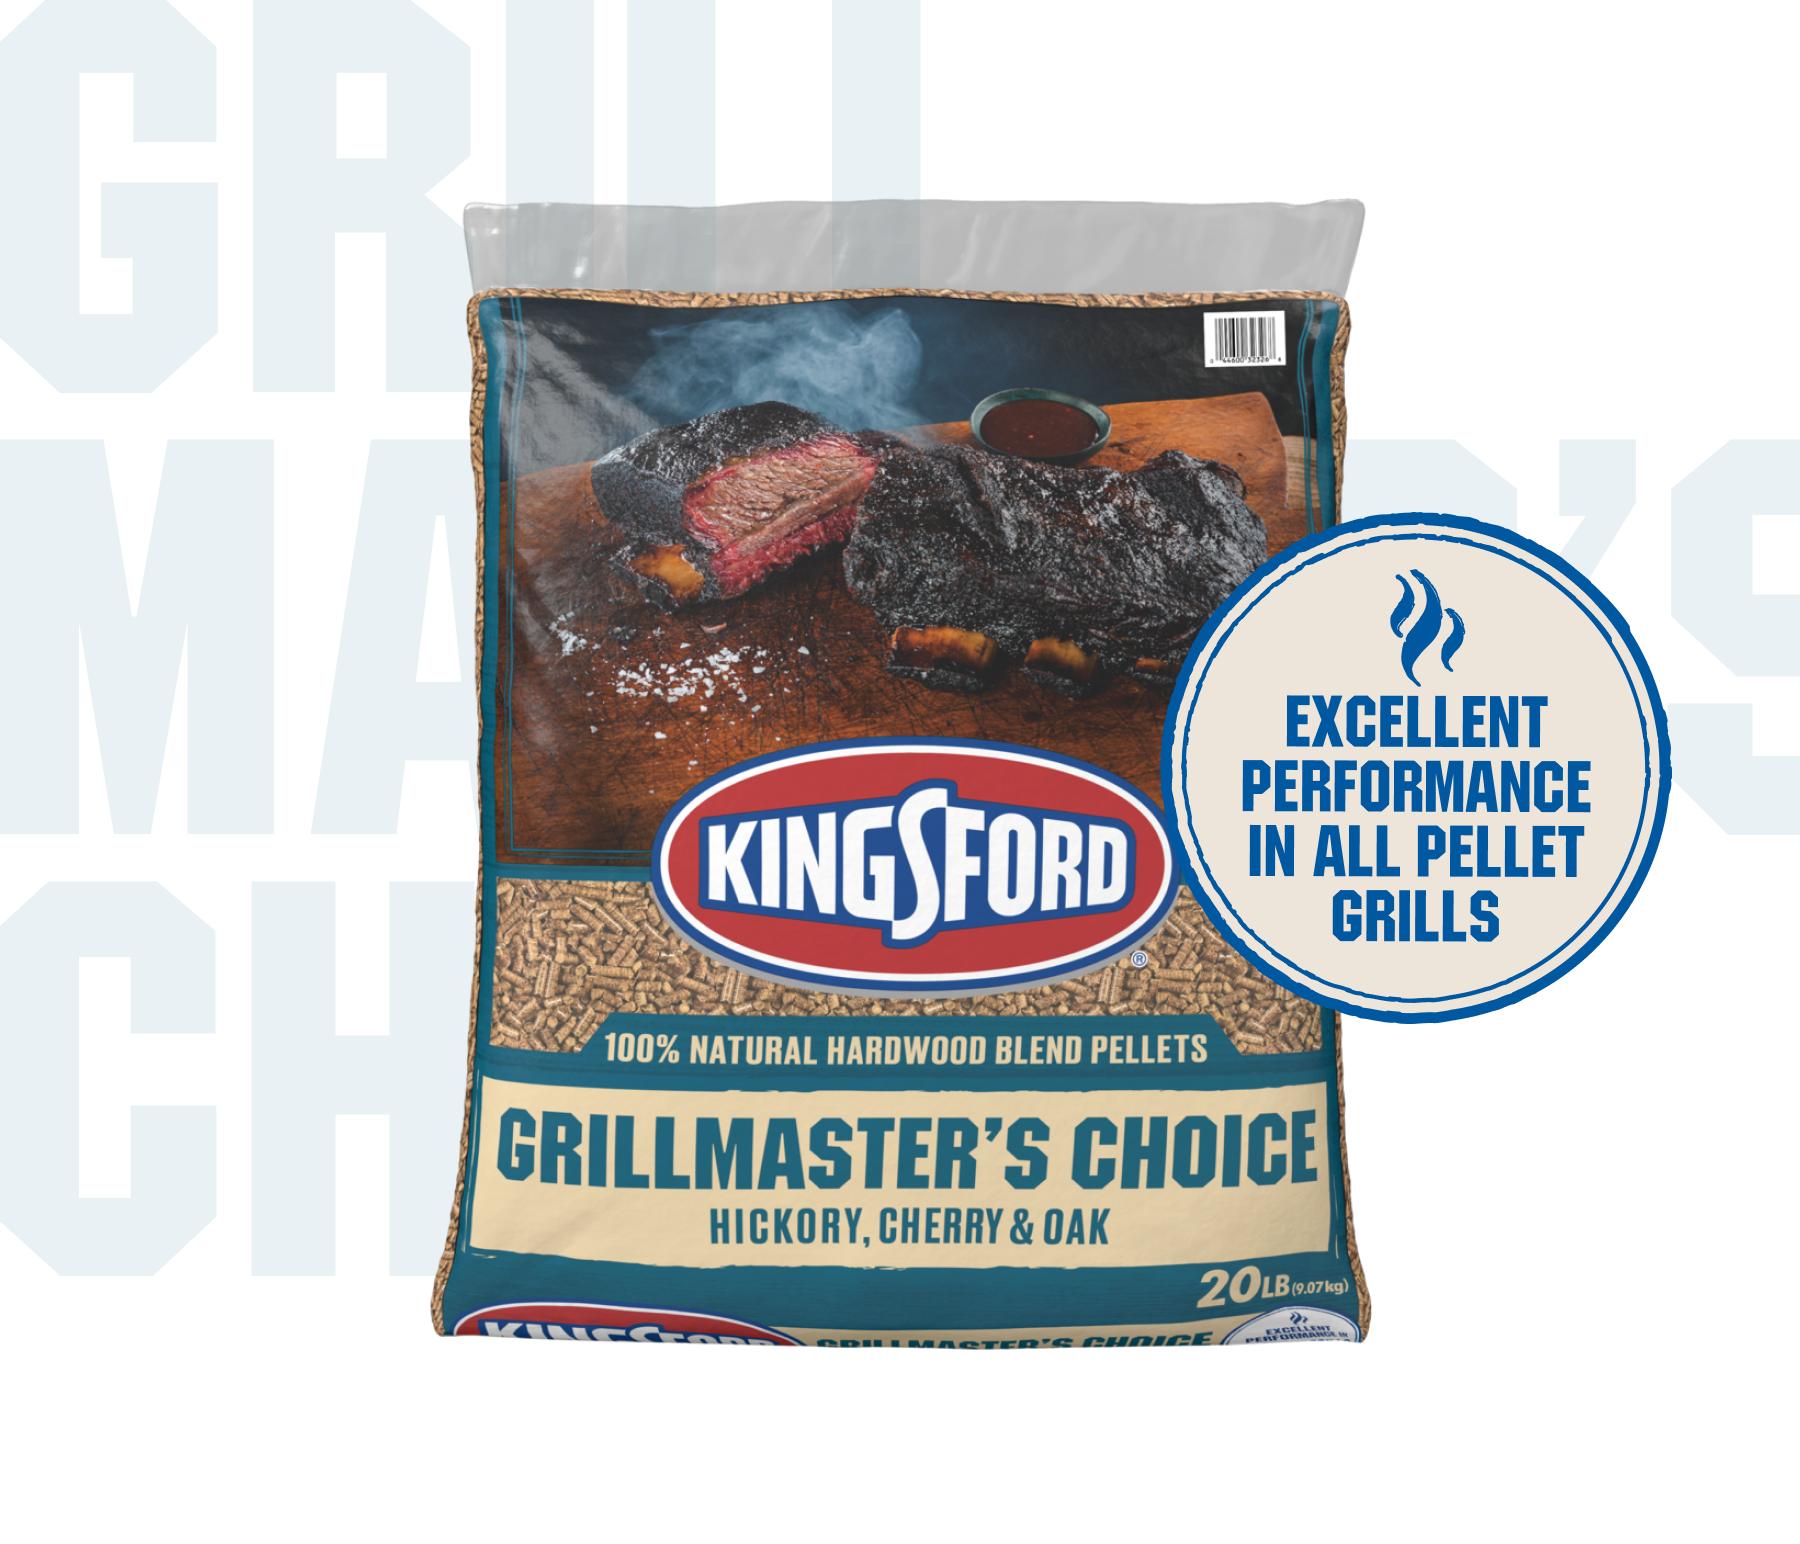 Kingsford® 100% Natural Hardwood Blend Pellets, Grillmaster’s Choice, Hickory, Cherry and Oak